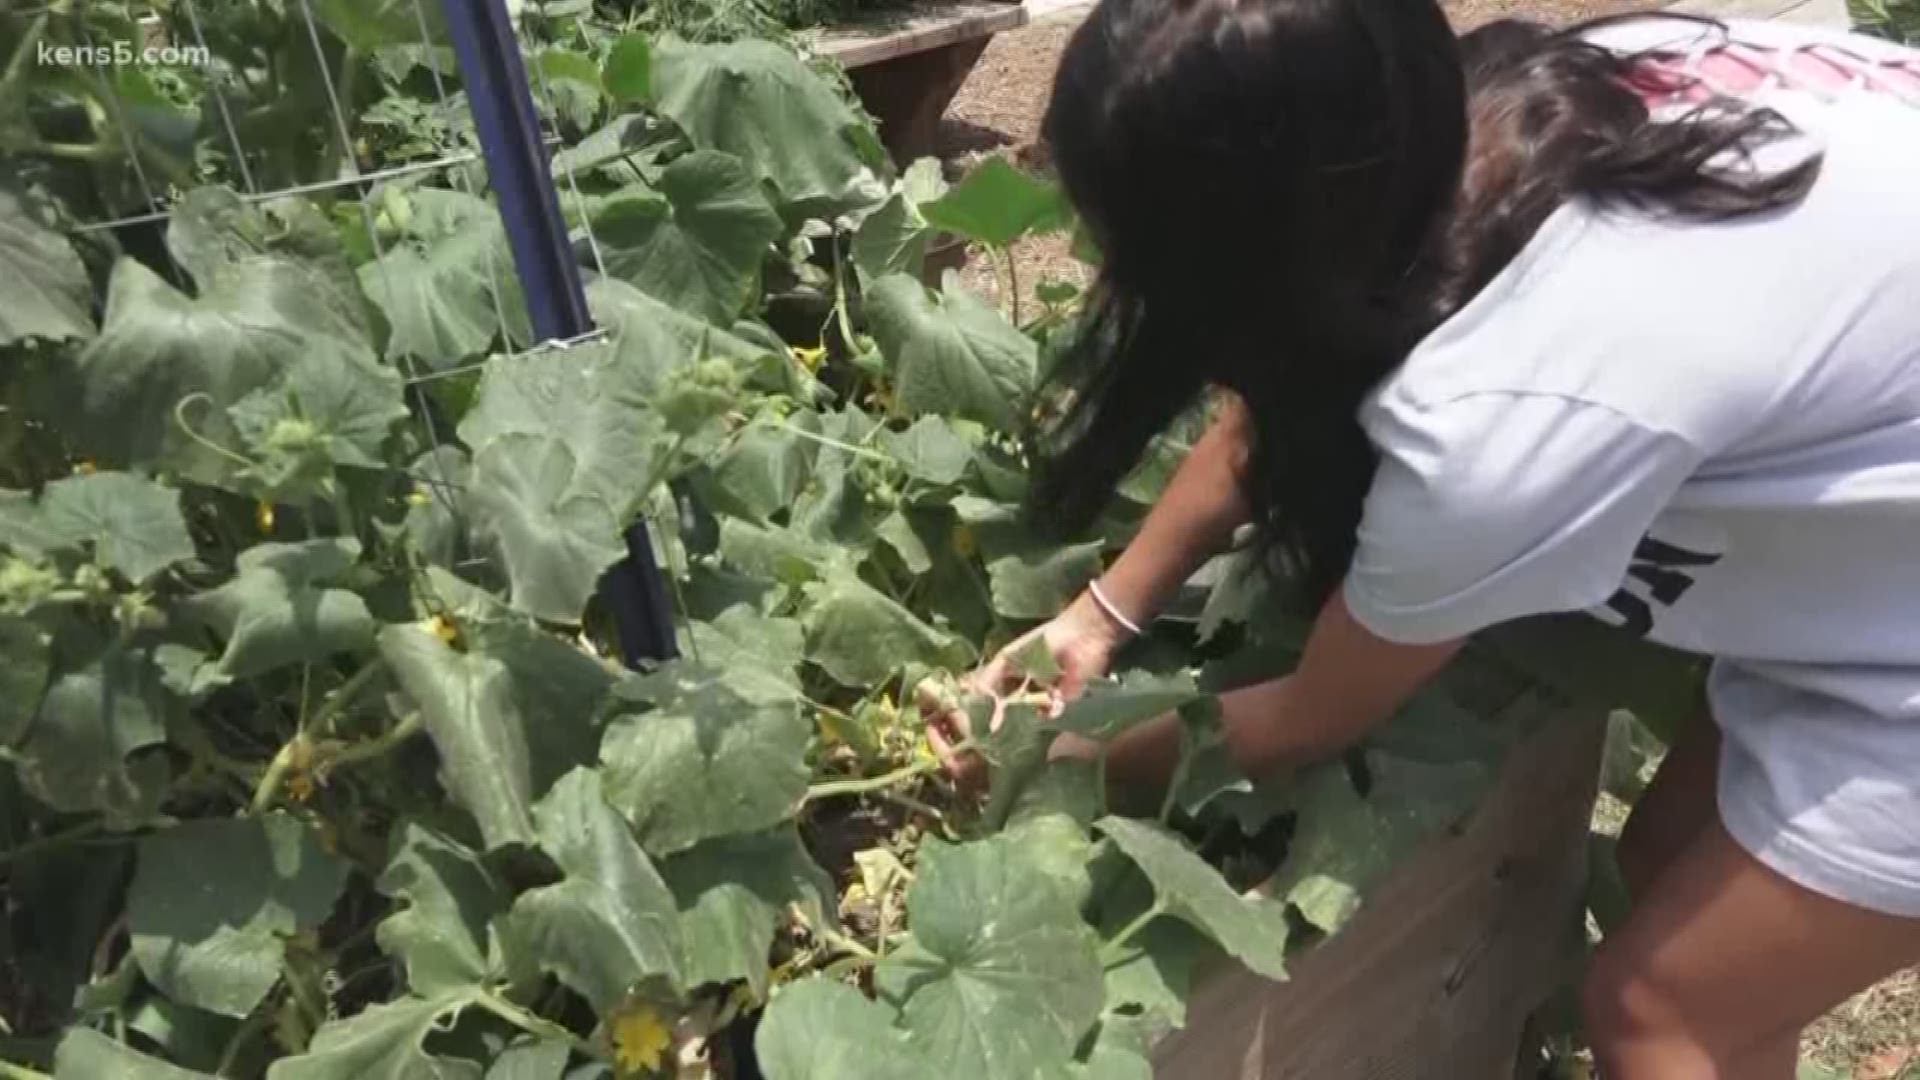 Roosevelt High School students are preparing things like hot pepper jelly and zucchini bread from things grown in their campus garden.